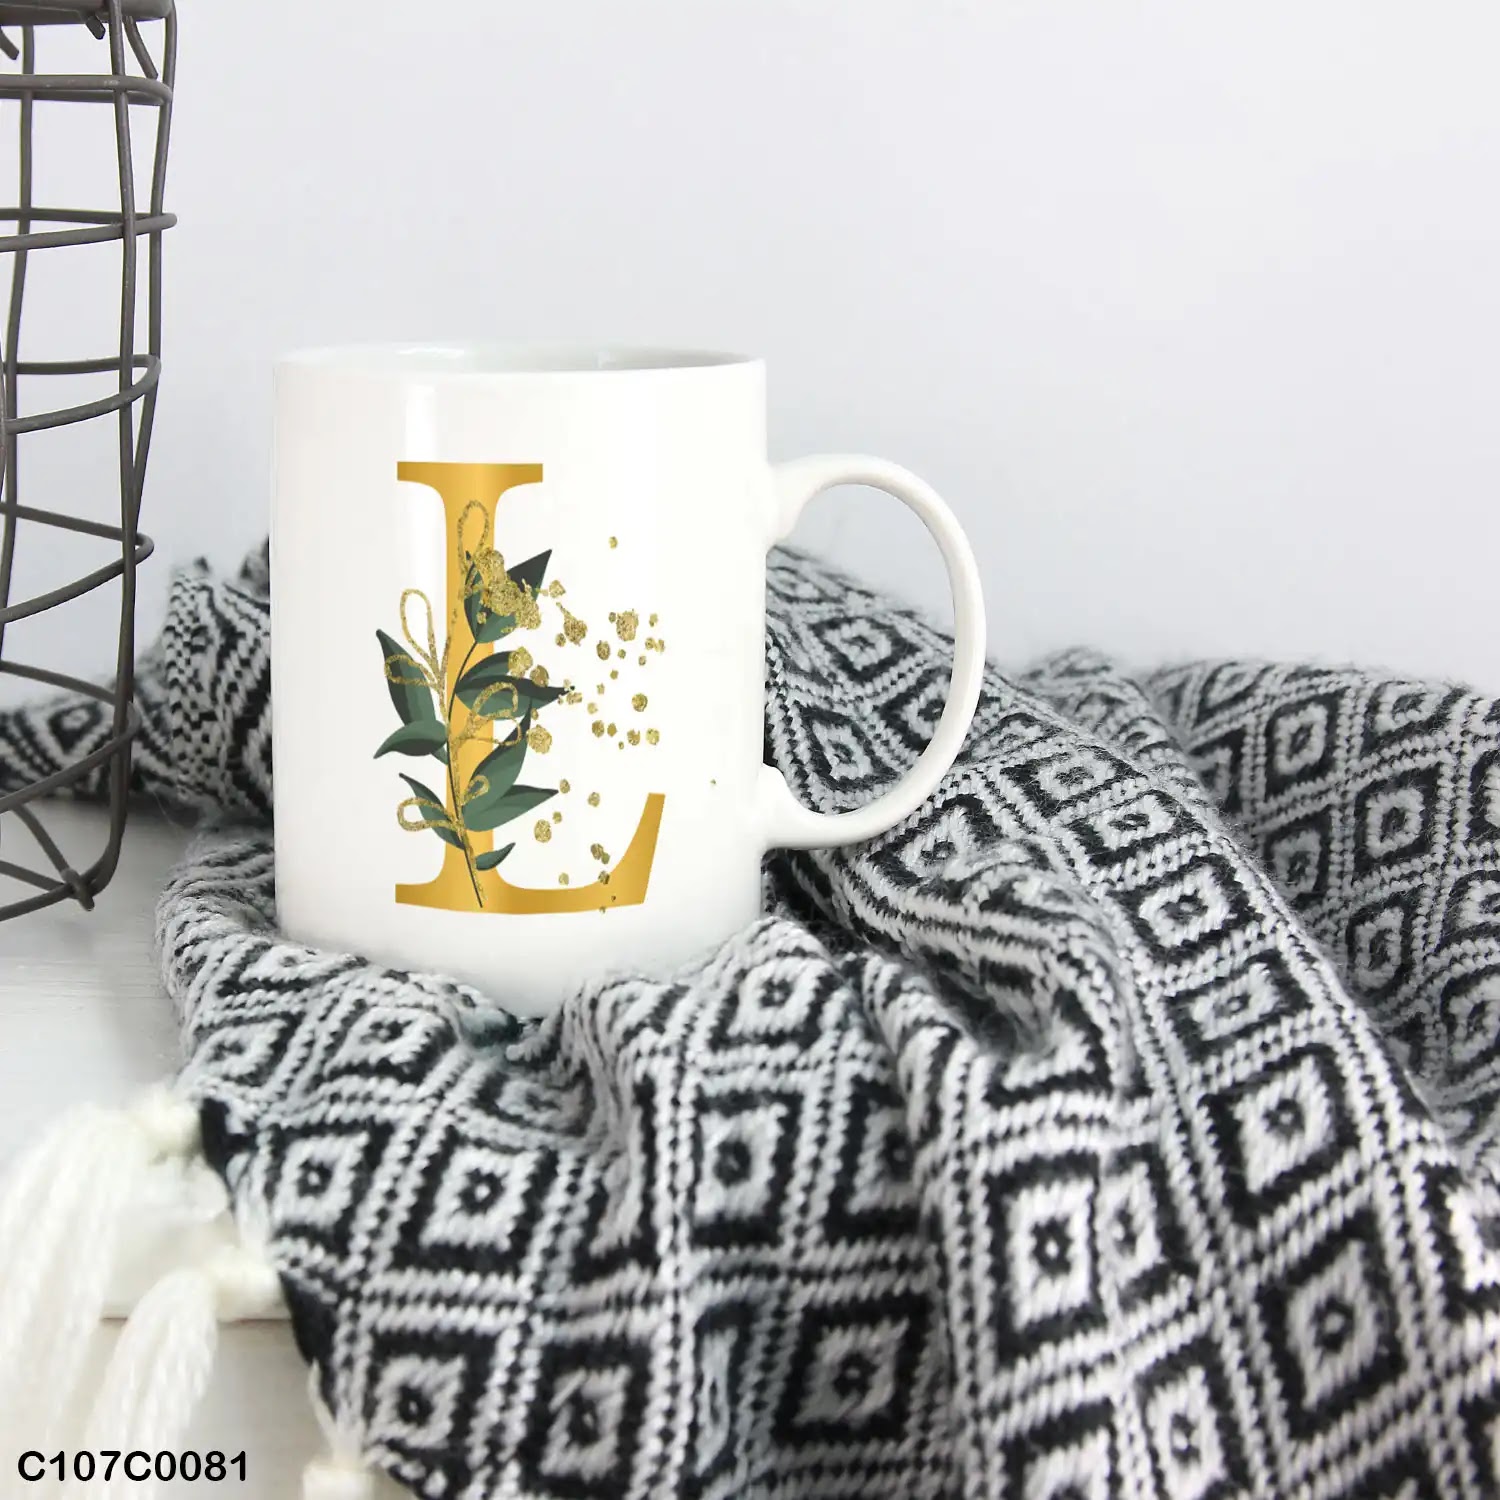 A white mug (cup) printed with gold Letter "L" and small green branch